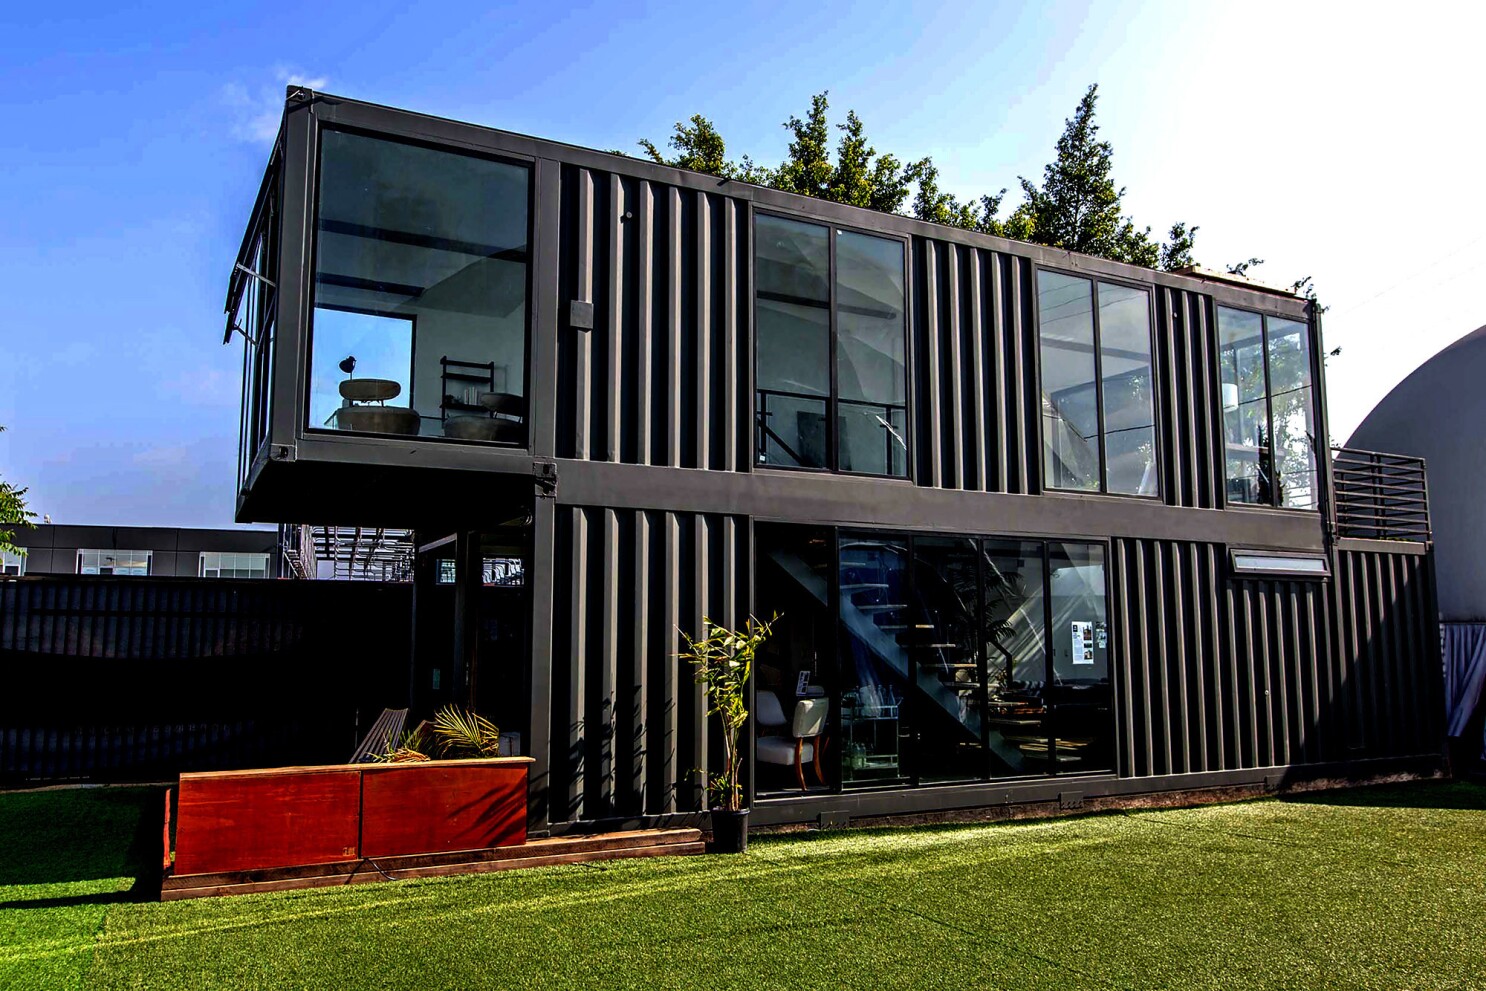 Luxury modern modular homes under 50k The Beauty And Affordability Of Modular Living Los Angeles Times